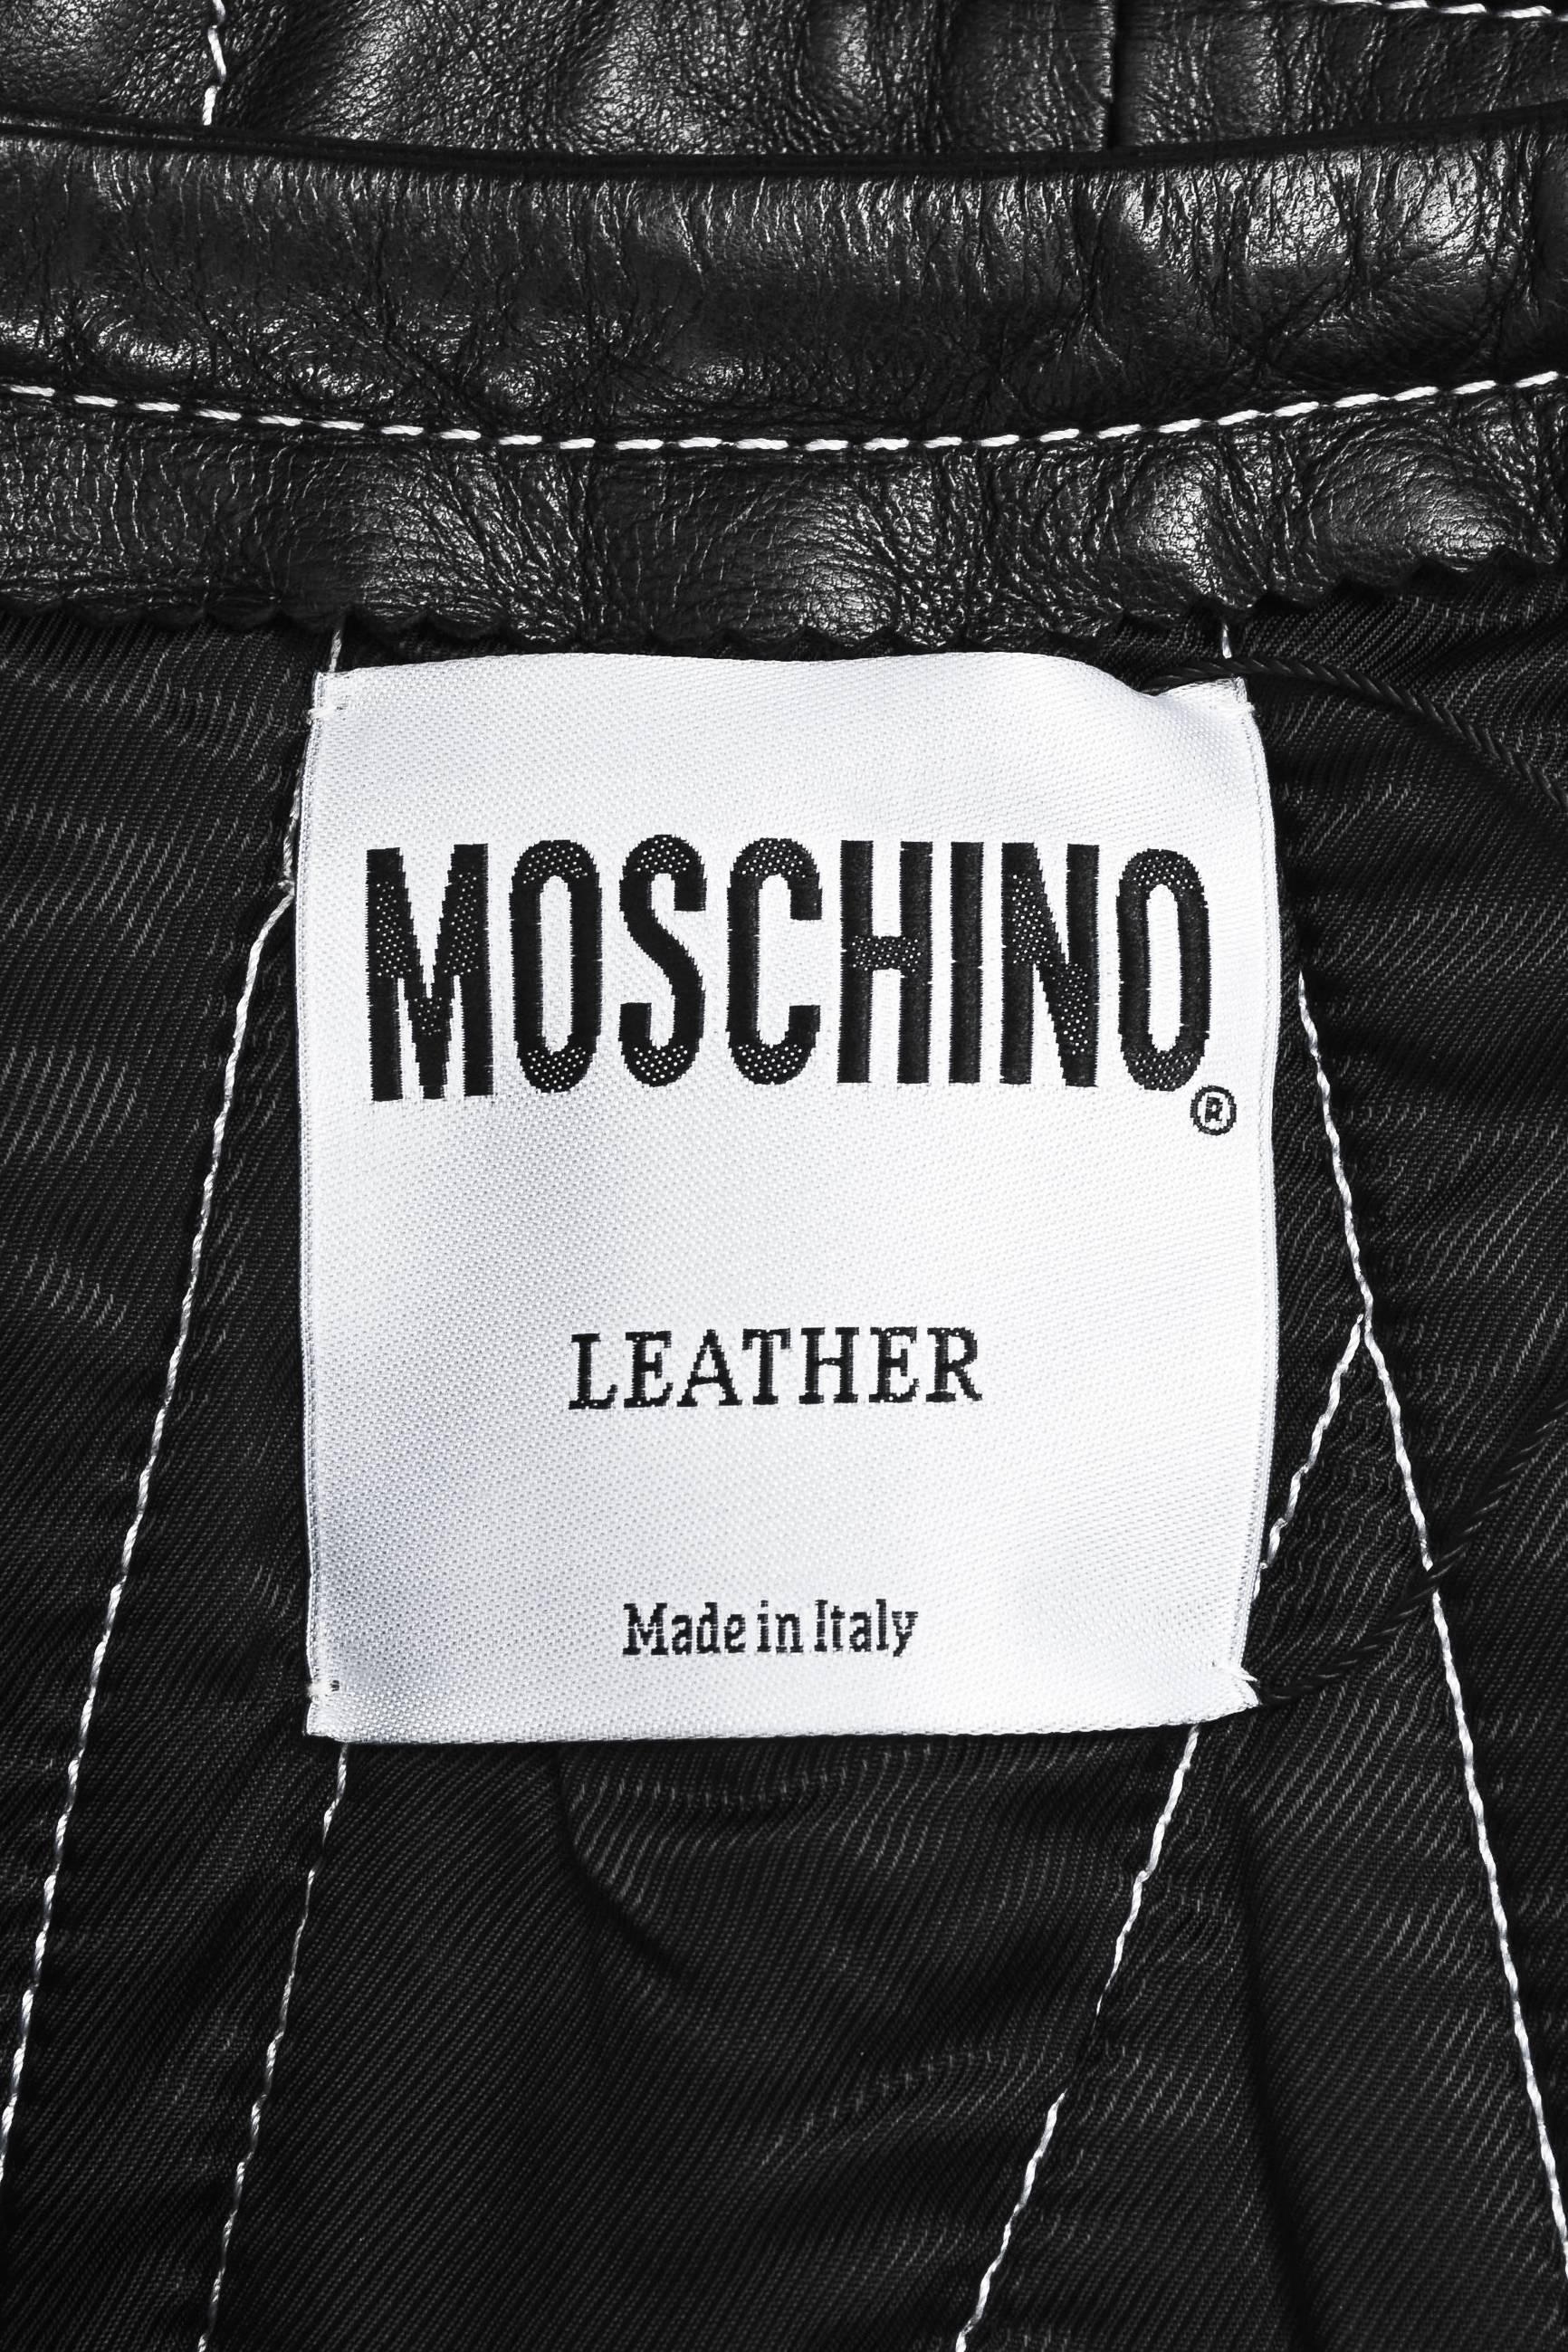 Women's Moschino Black & White Leather Top Stitched Mini Skirt SZ 42 For Sale